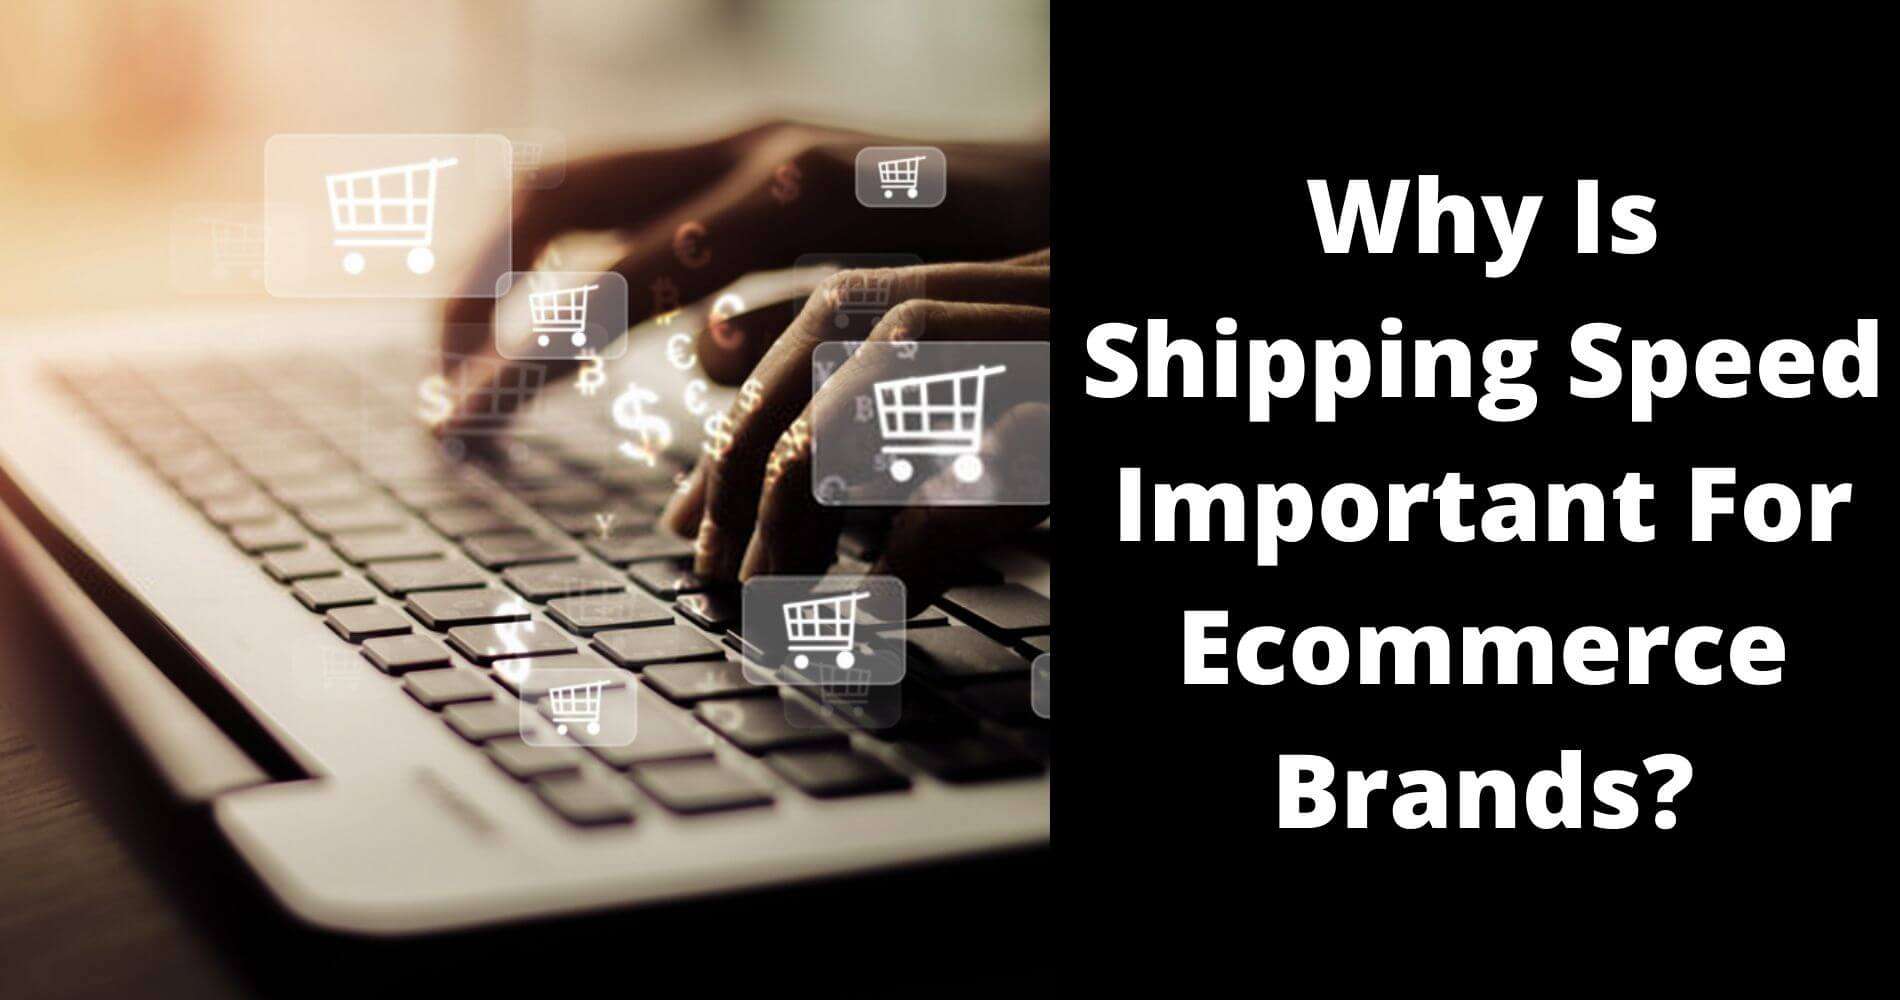 Why Is Shipping Speed Important For Ecommerce Brands